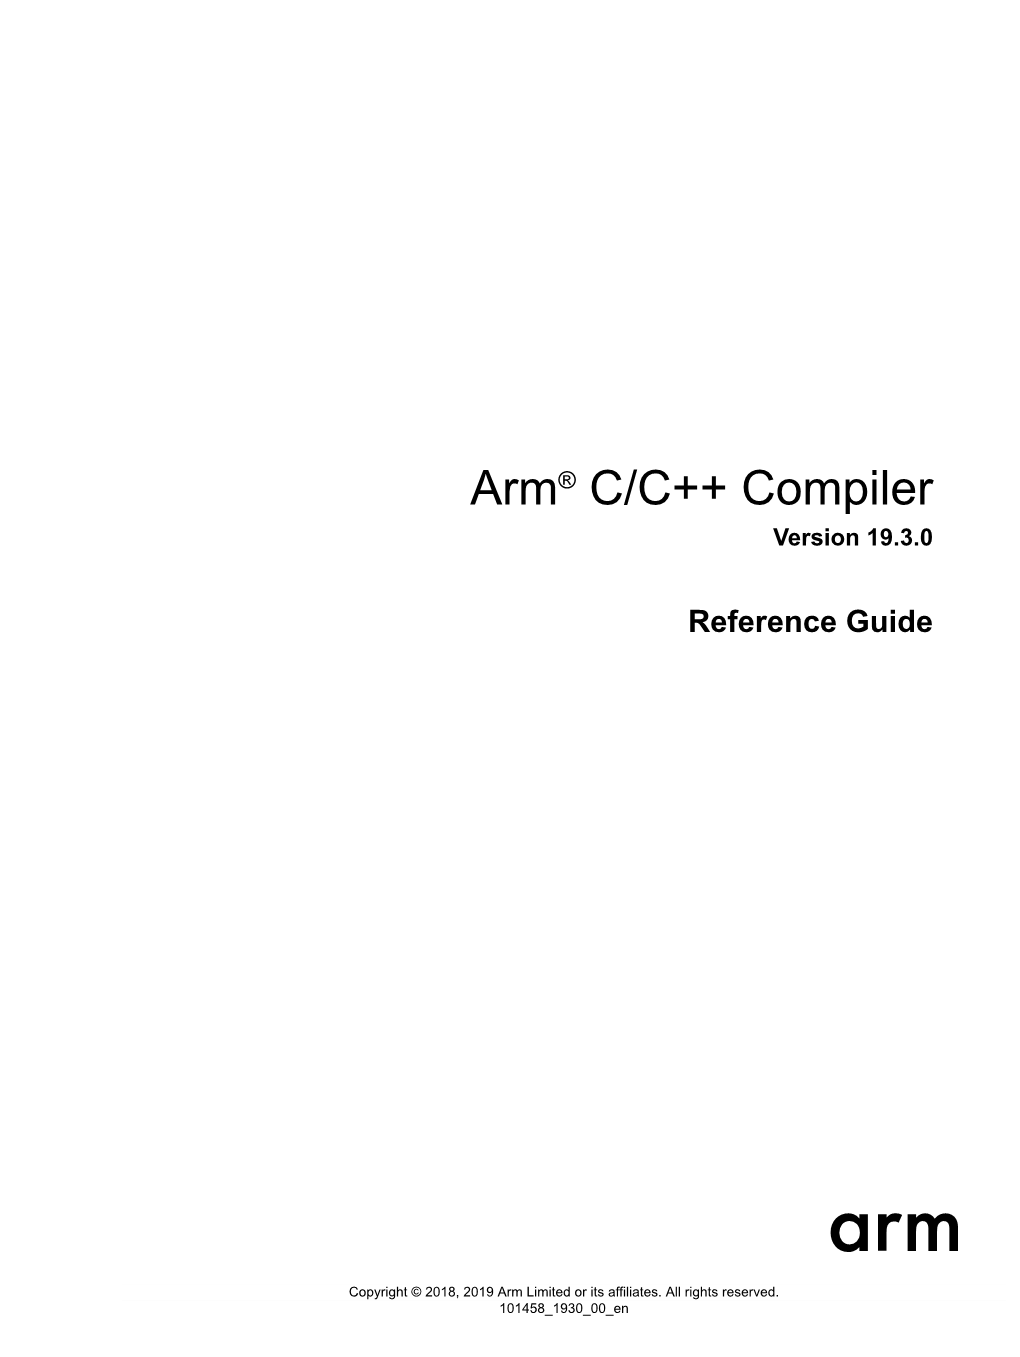 Arm® C/C++ Compiler Reference Guide Copyright © 2018, 2019 Arm Limited Or Its Affiliates